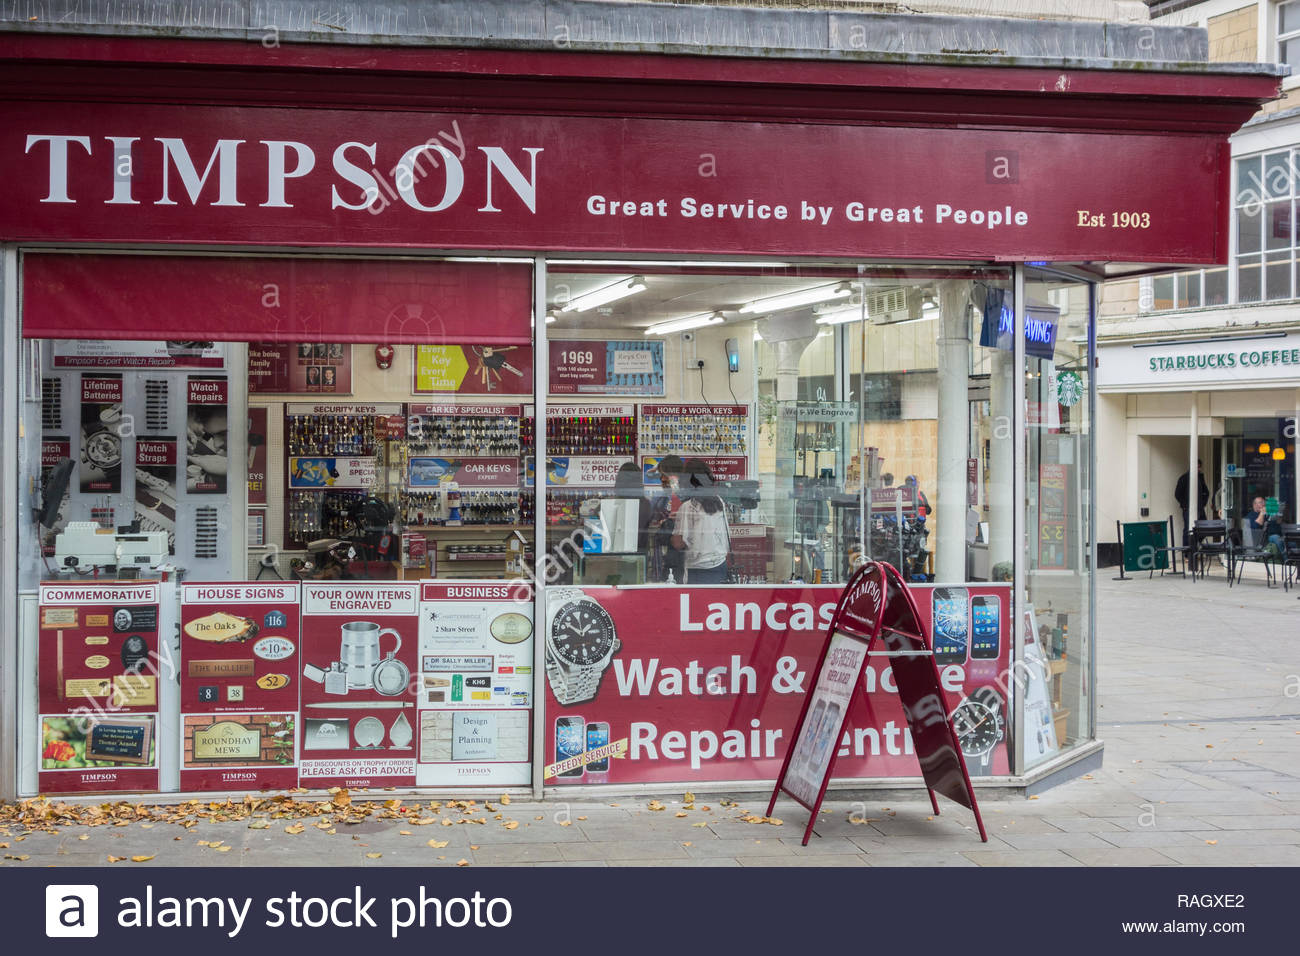 resoling boots timpsons